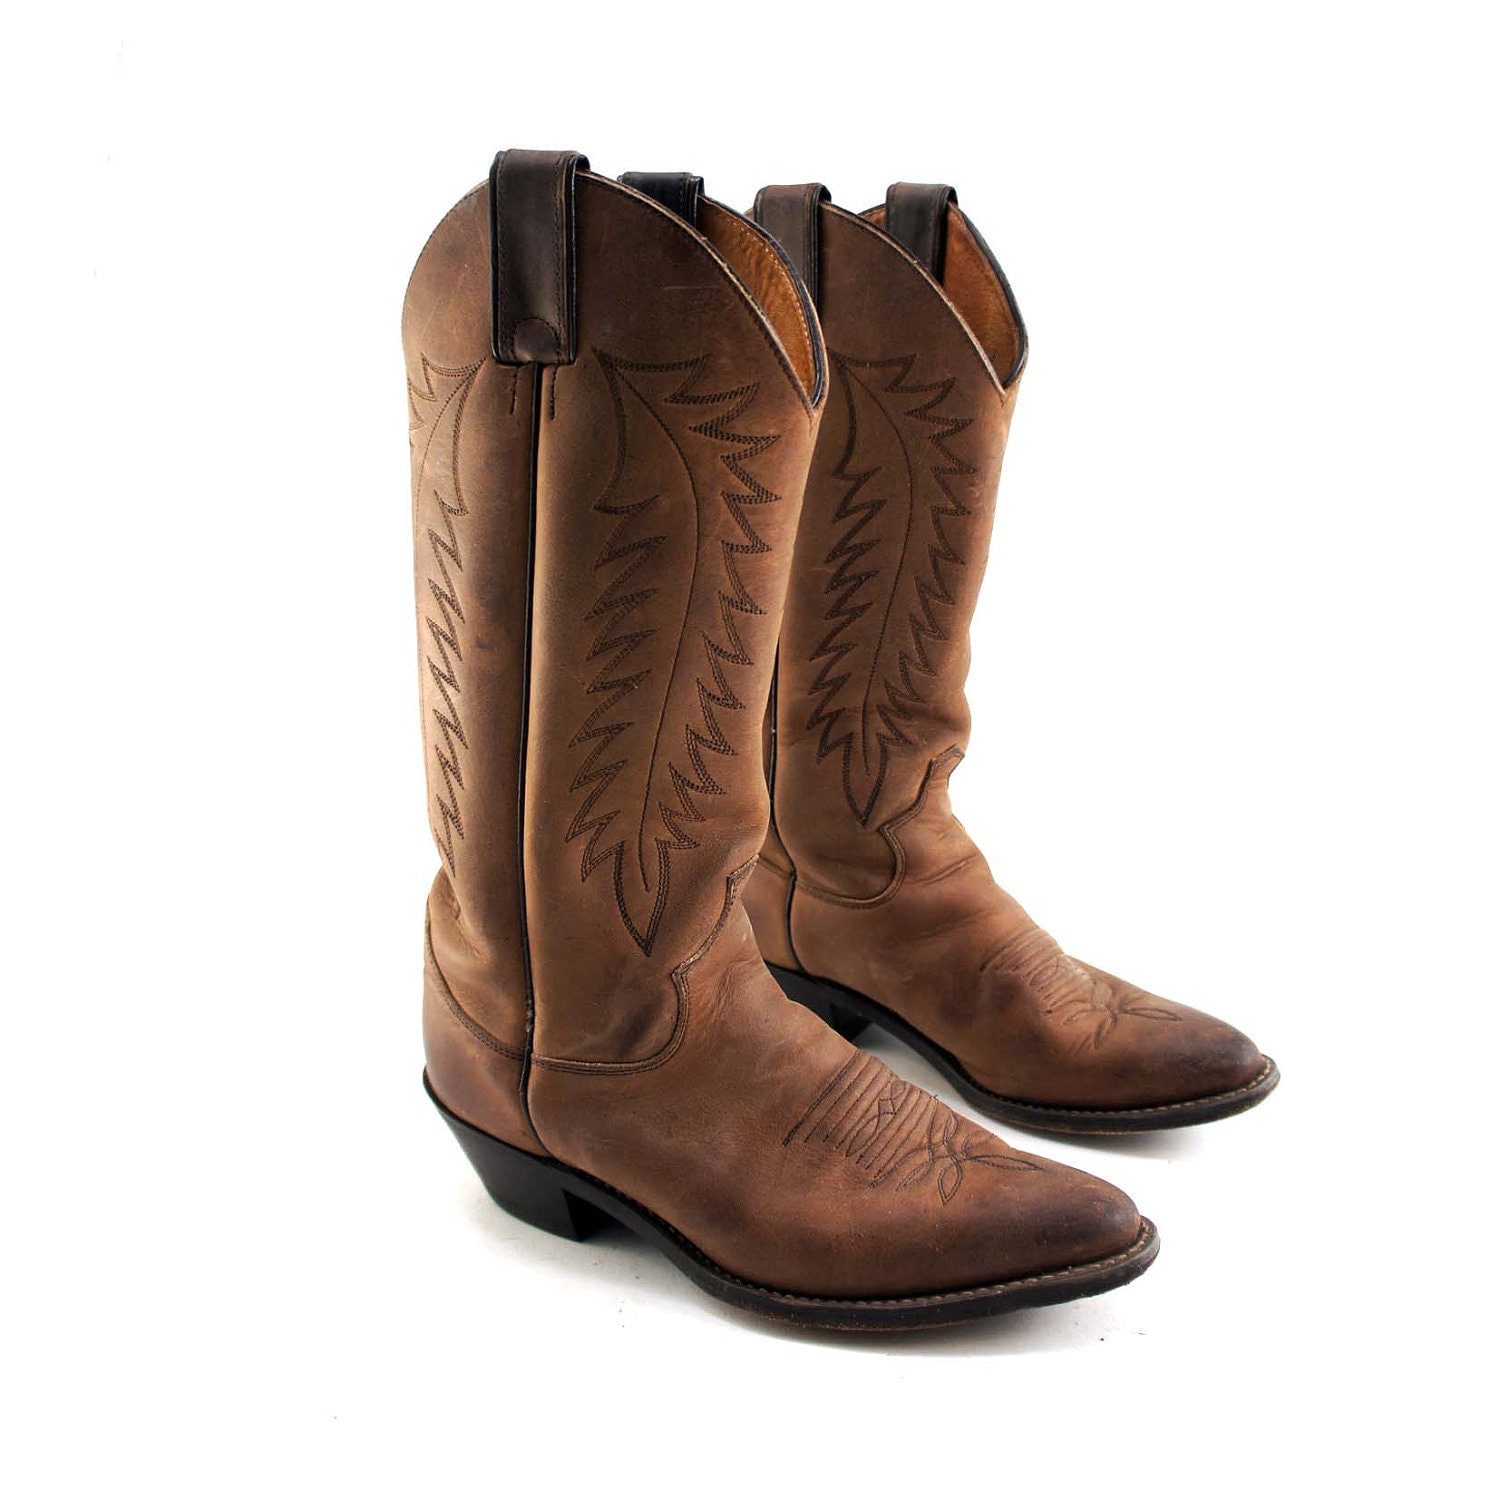 Brown Cowboy Boots For Women - Yu Boots